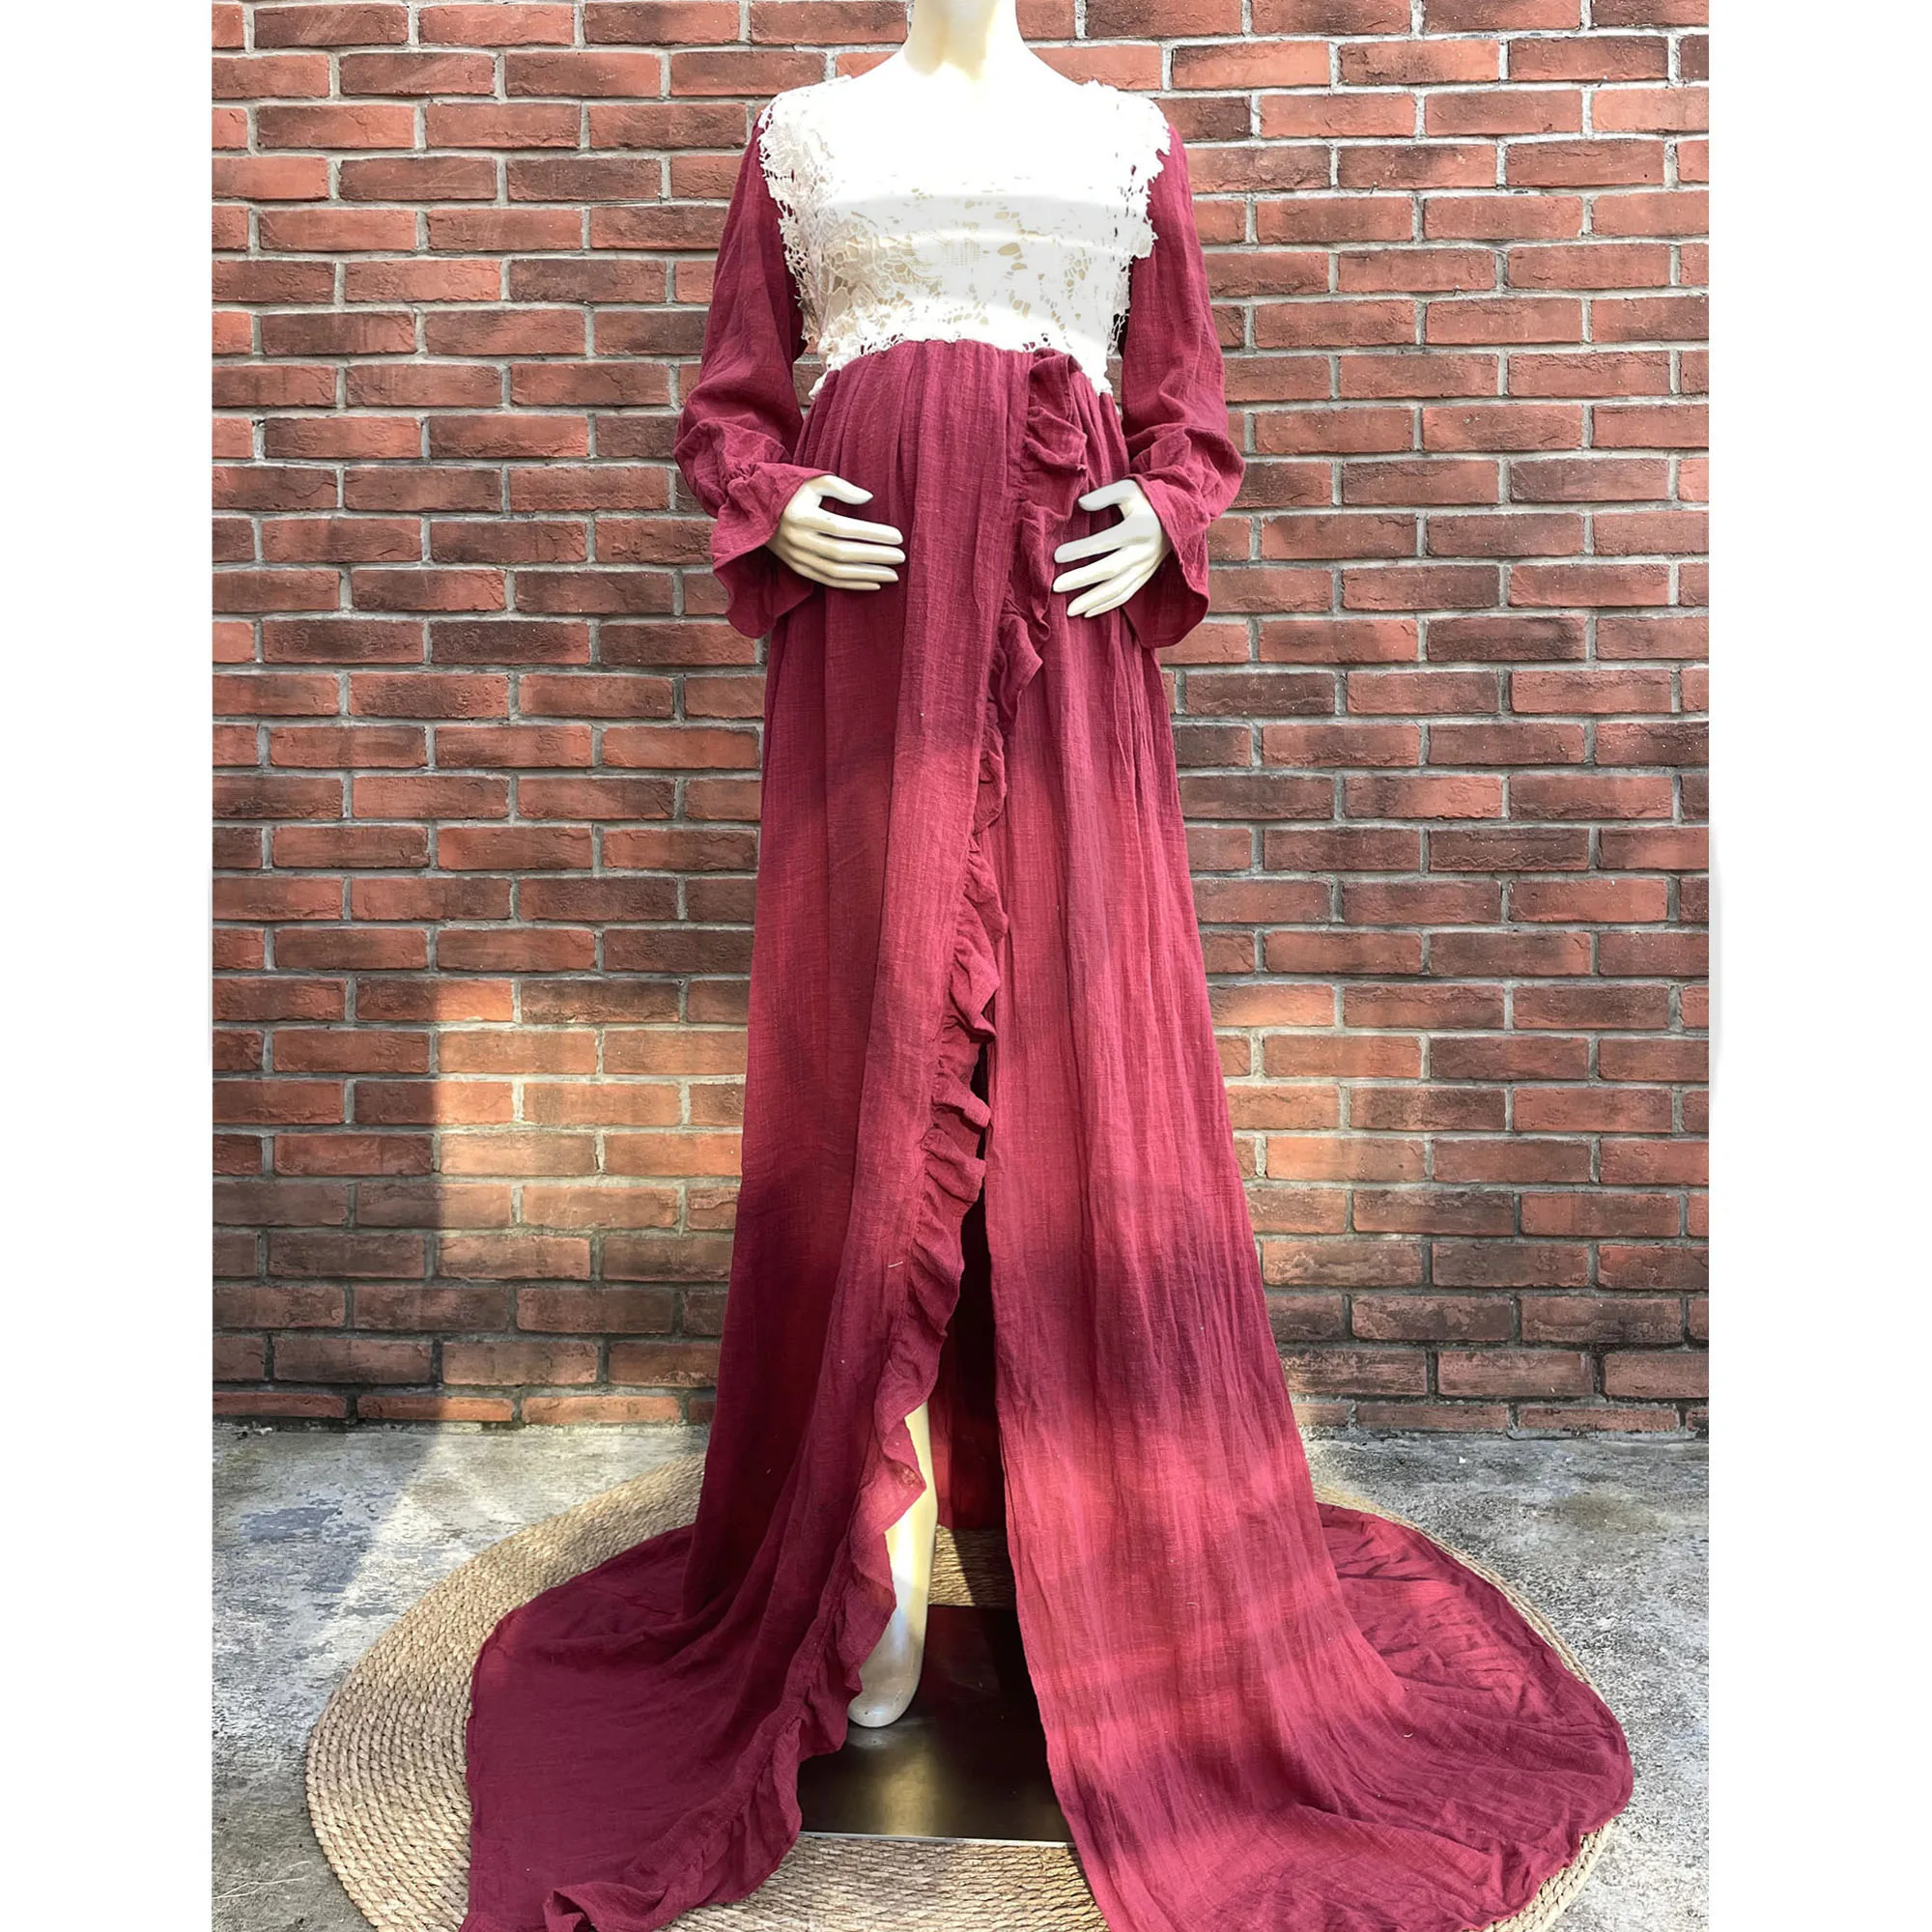 Maxi Long Cotton Kaftan Photo Shoot Full Sleeves Robe Maternity Dress Evening Party Costume for Women Photography Accessories enlarge